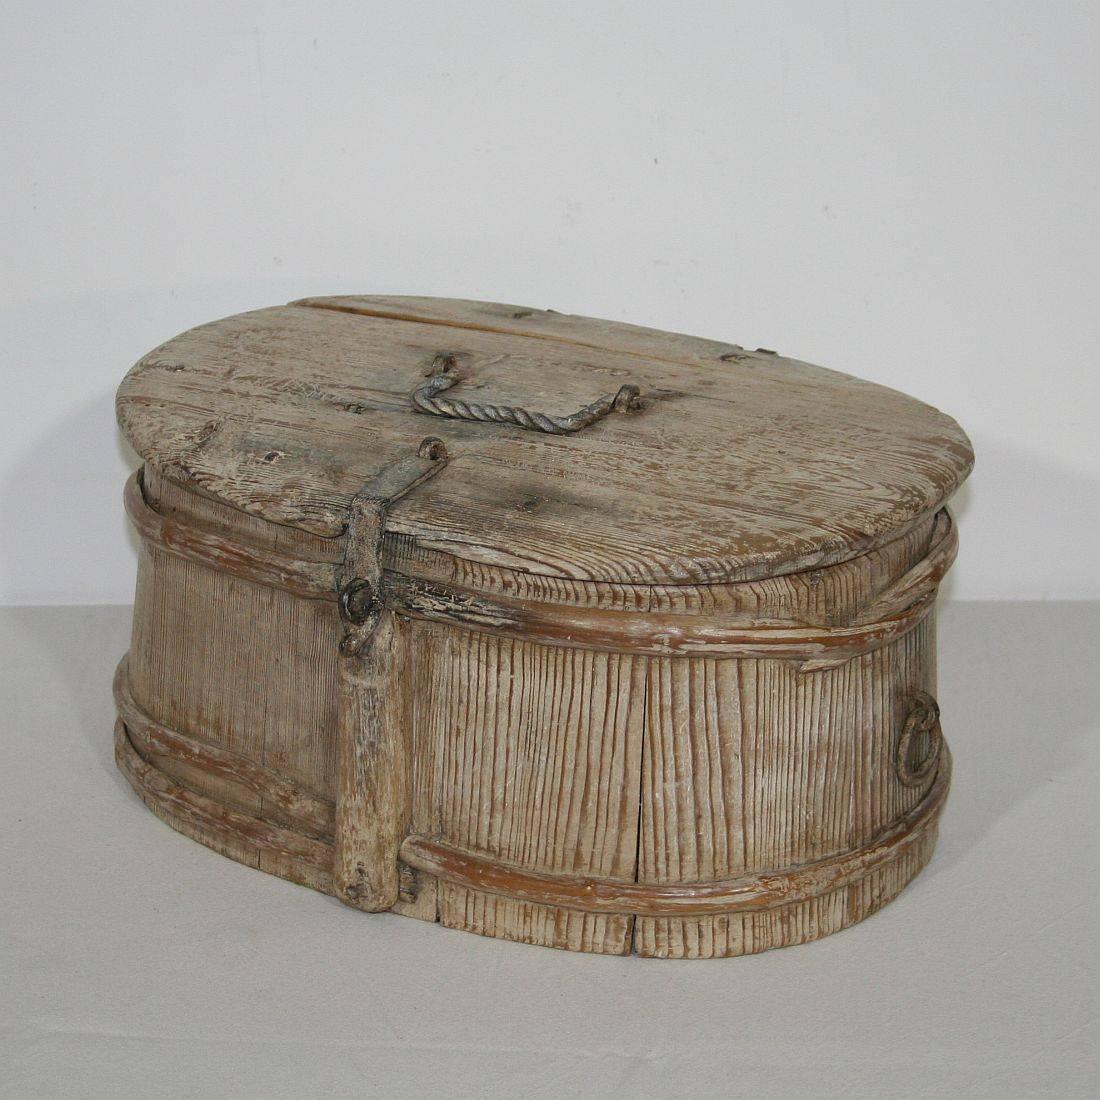 Spectacular Swedish bentwood travel-box dated 1706 with stunning patina and wrought iron details.
Sweden, 1706
Weathered. More pictures are available on request.